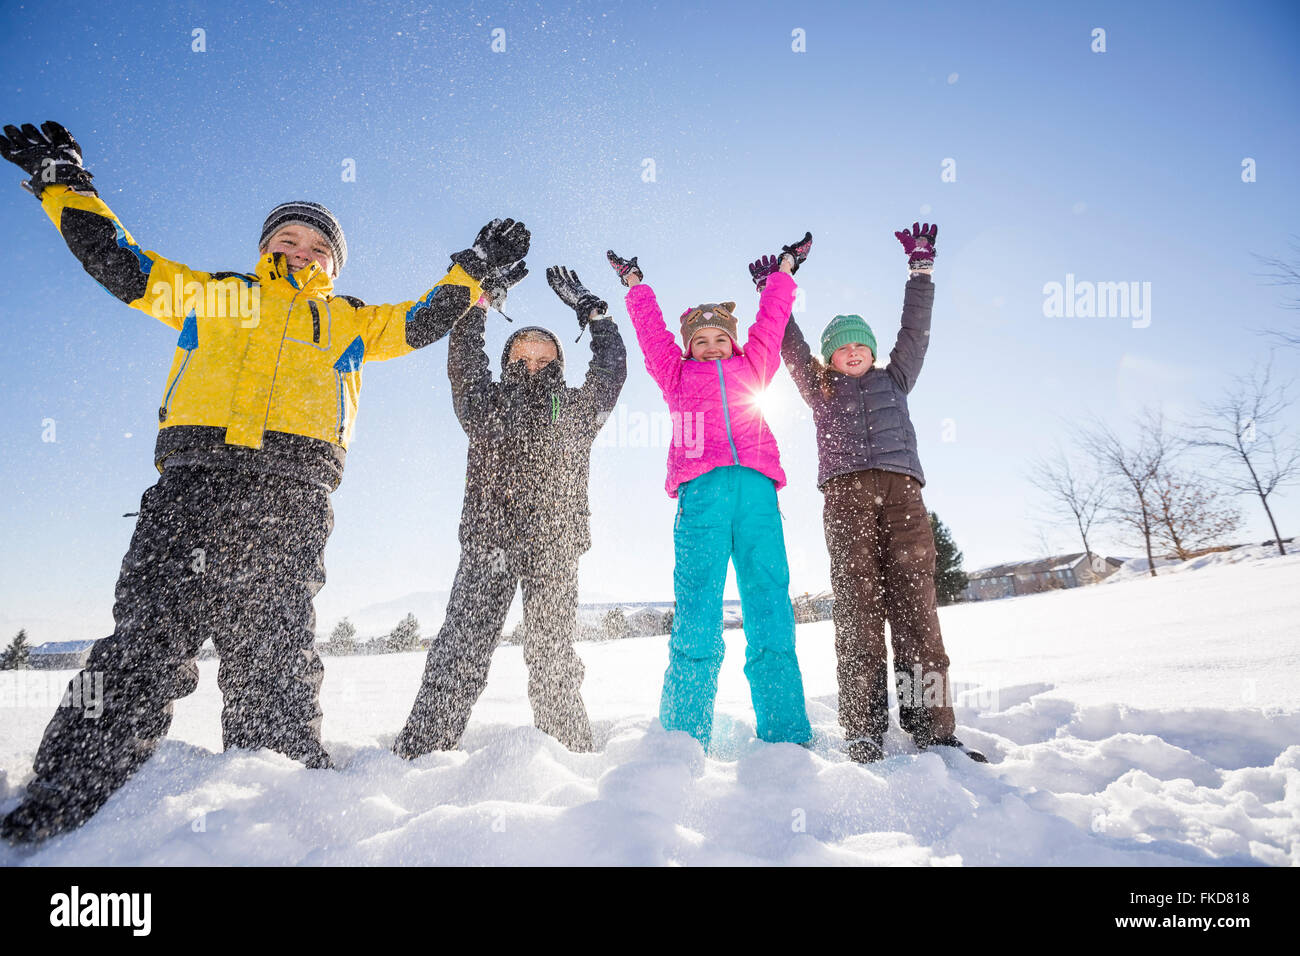 Enfants (8-9, 10-11) standing in snow with arms raised Banque D'Images